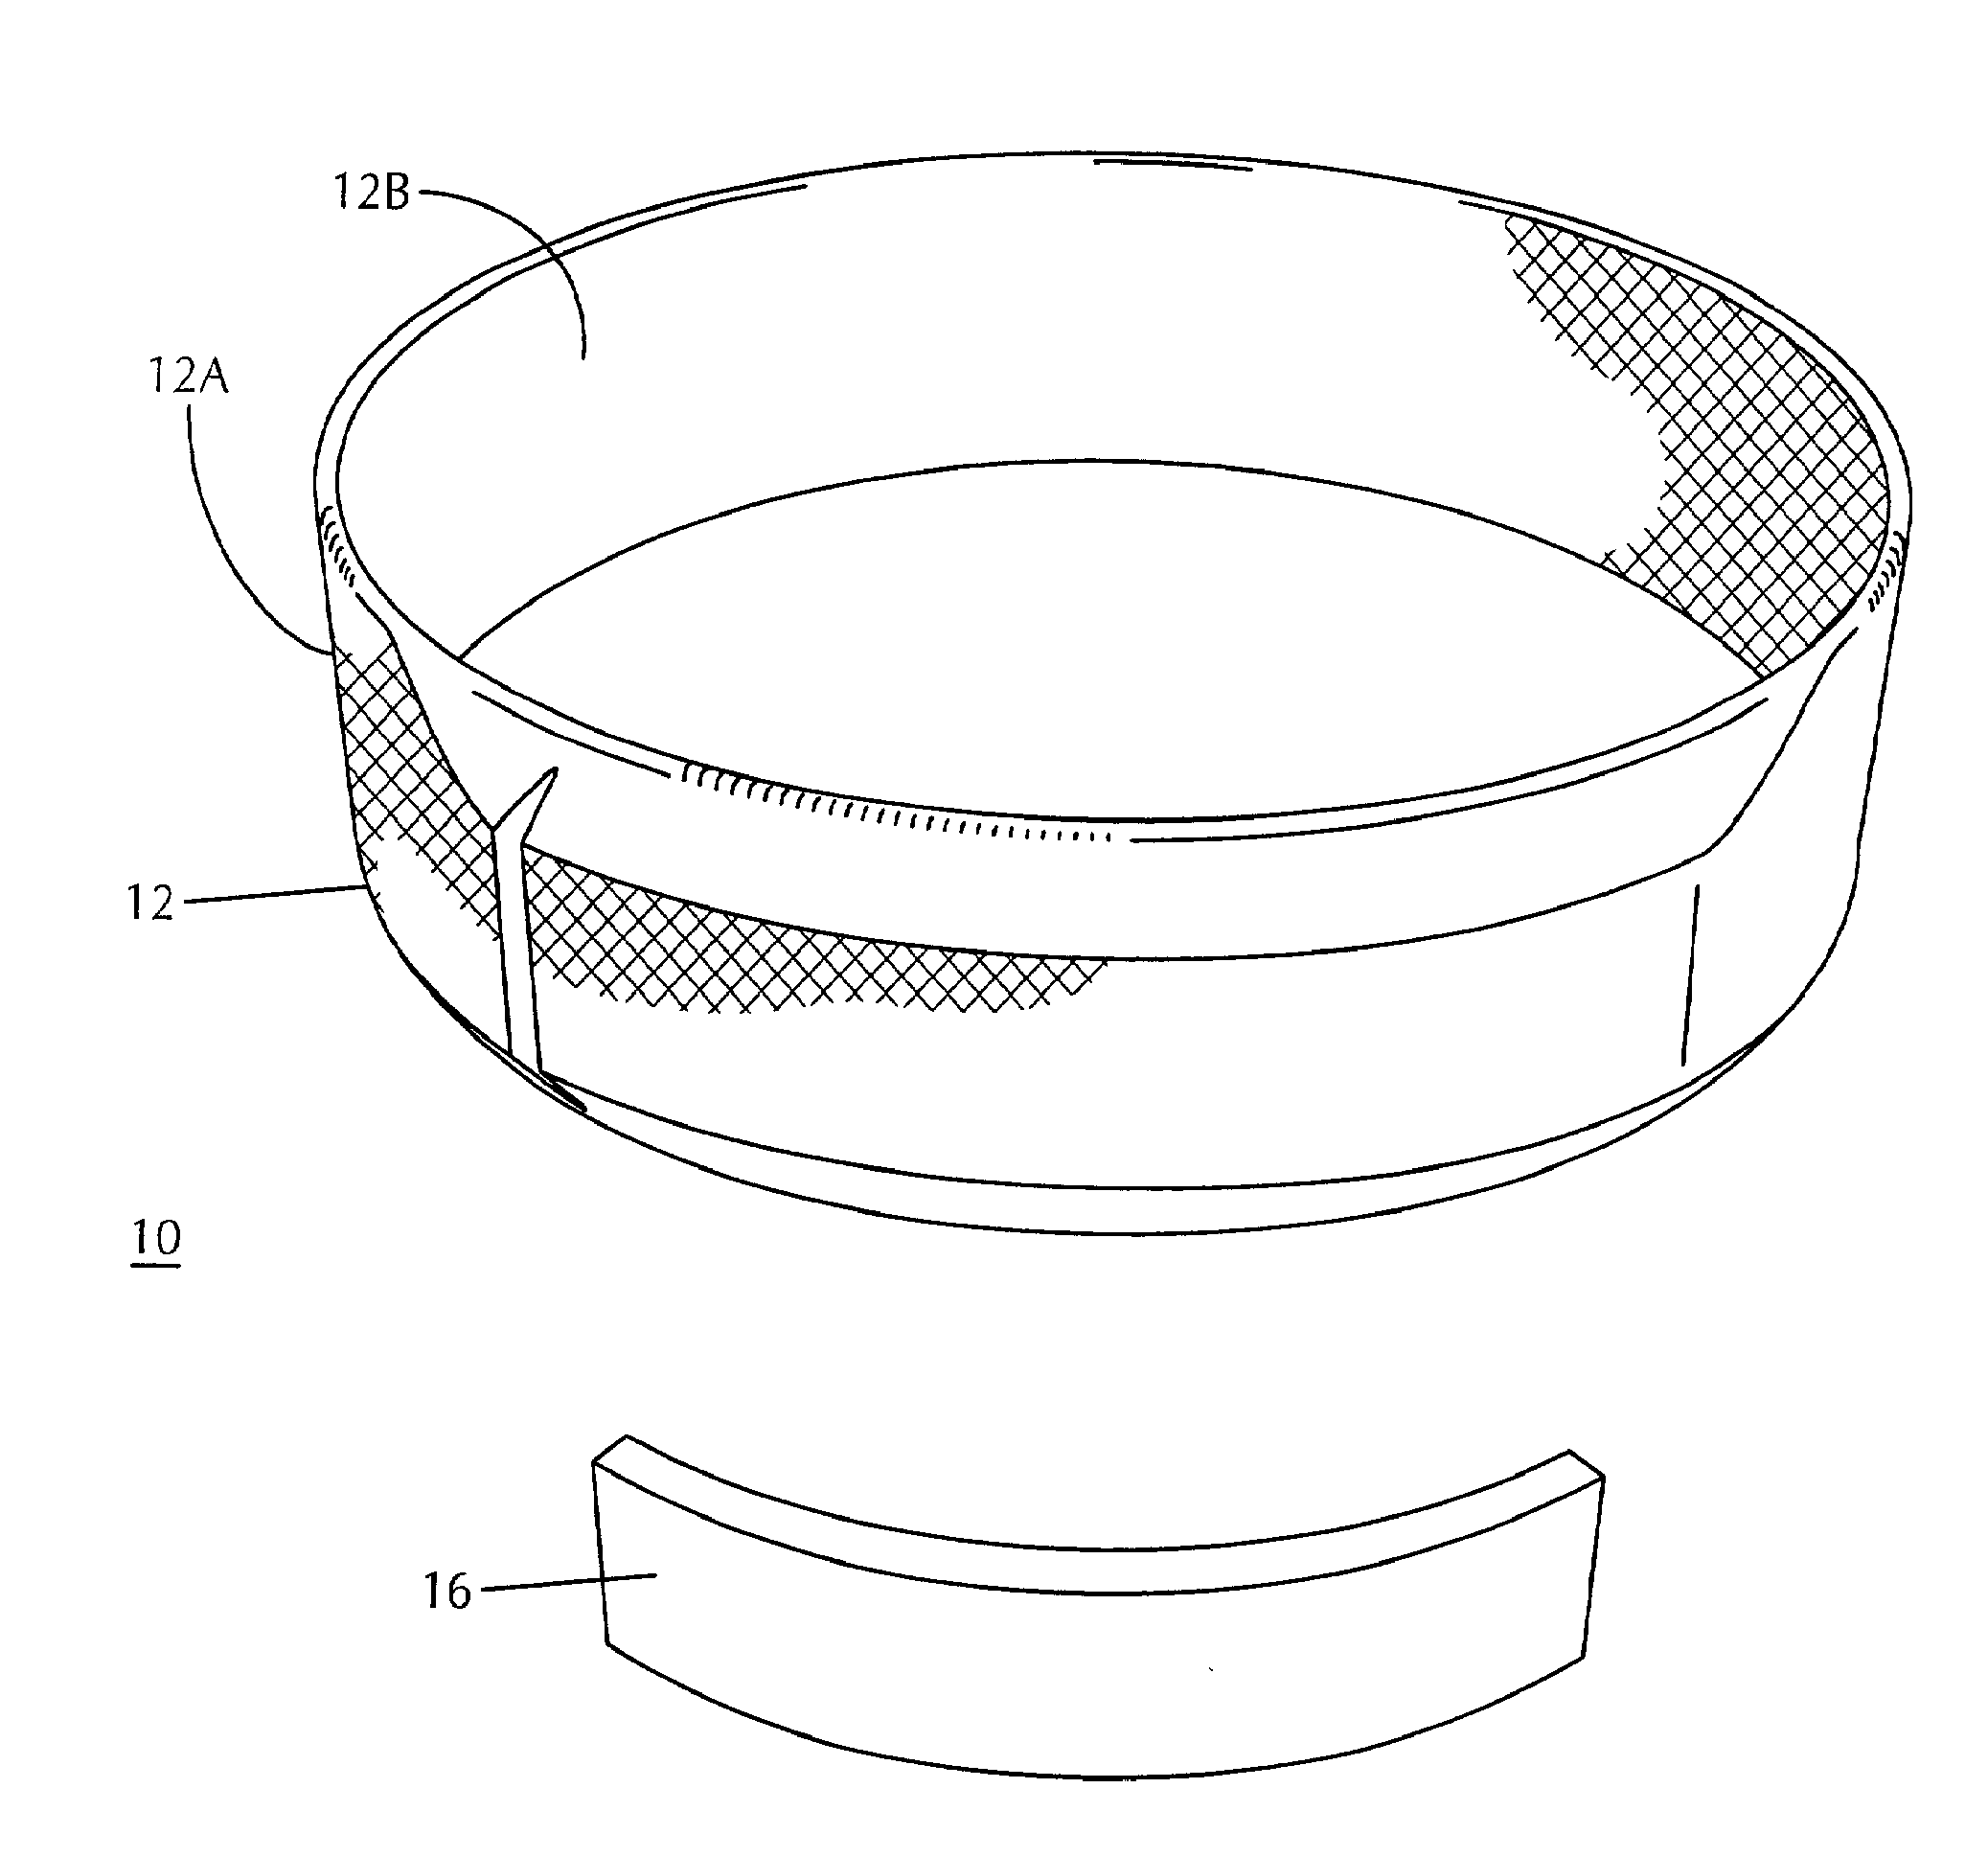 Apparatus for Enhancing Absorption and Dissipation of Impact Forces for Sweatbands